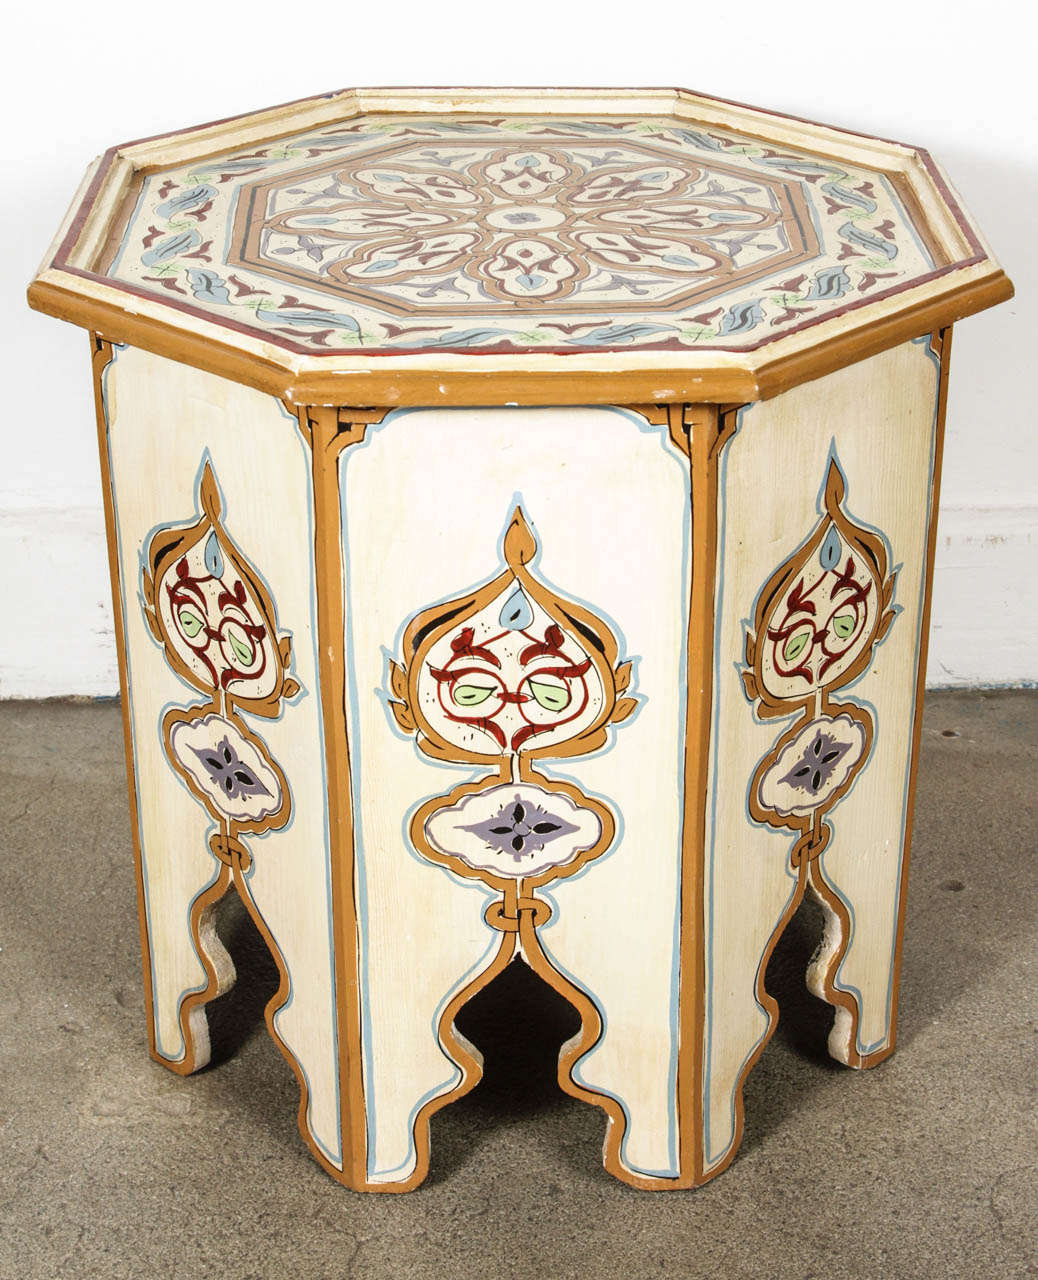 Moroccan colorful hand-painted side table with Moorish design. White background with multicolored floral and geometric designs. Very fine artwork on an octagonal shape base. You can use them as night stand or side table. This exotic side tables from